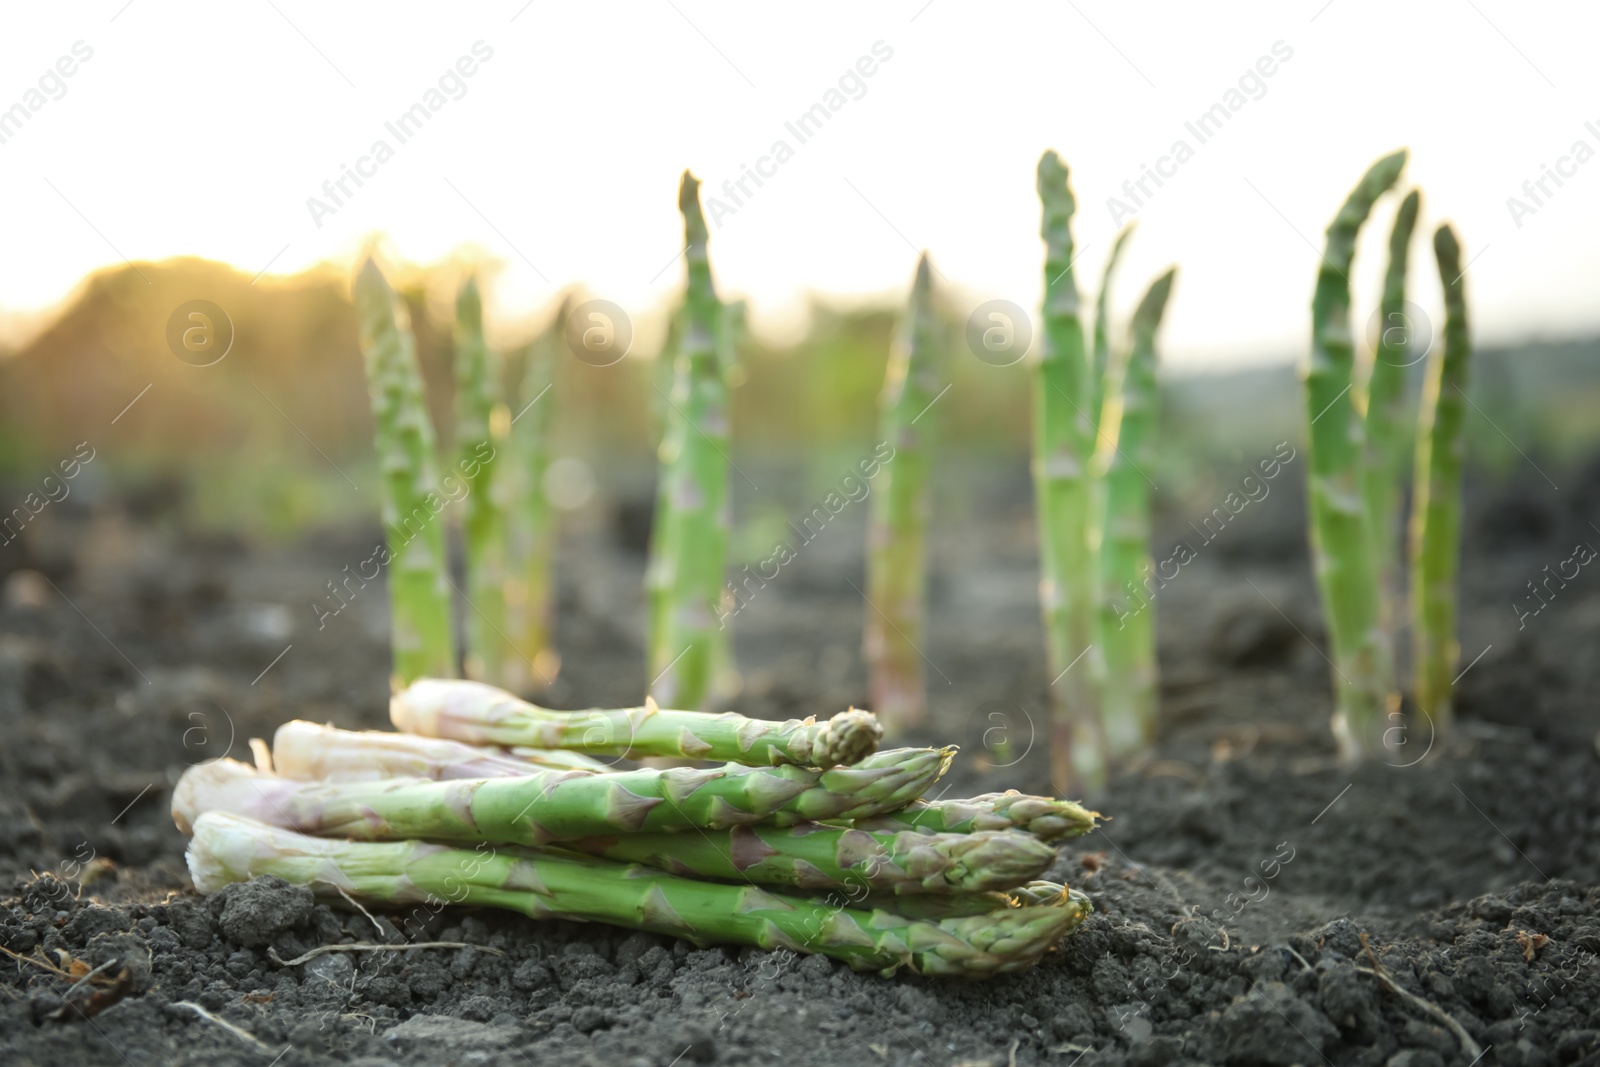 Photo of Pile of fresh asparagus on ground outdoors